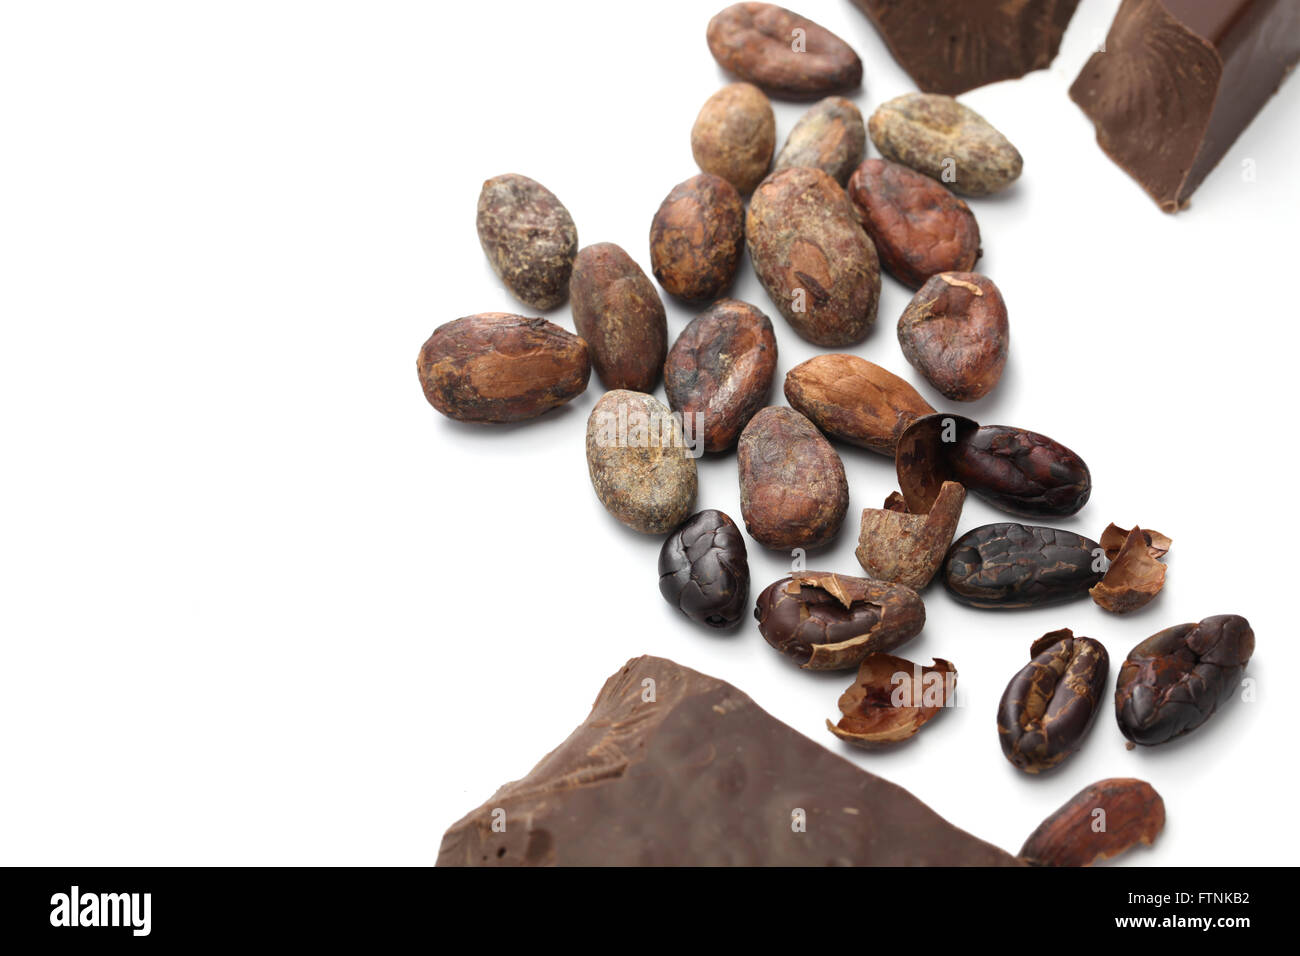 raw cacao beans, roasted cacao beans and chocolate on white background Stock Photo